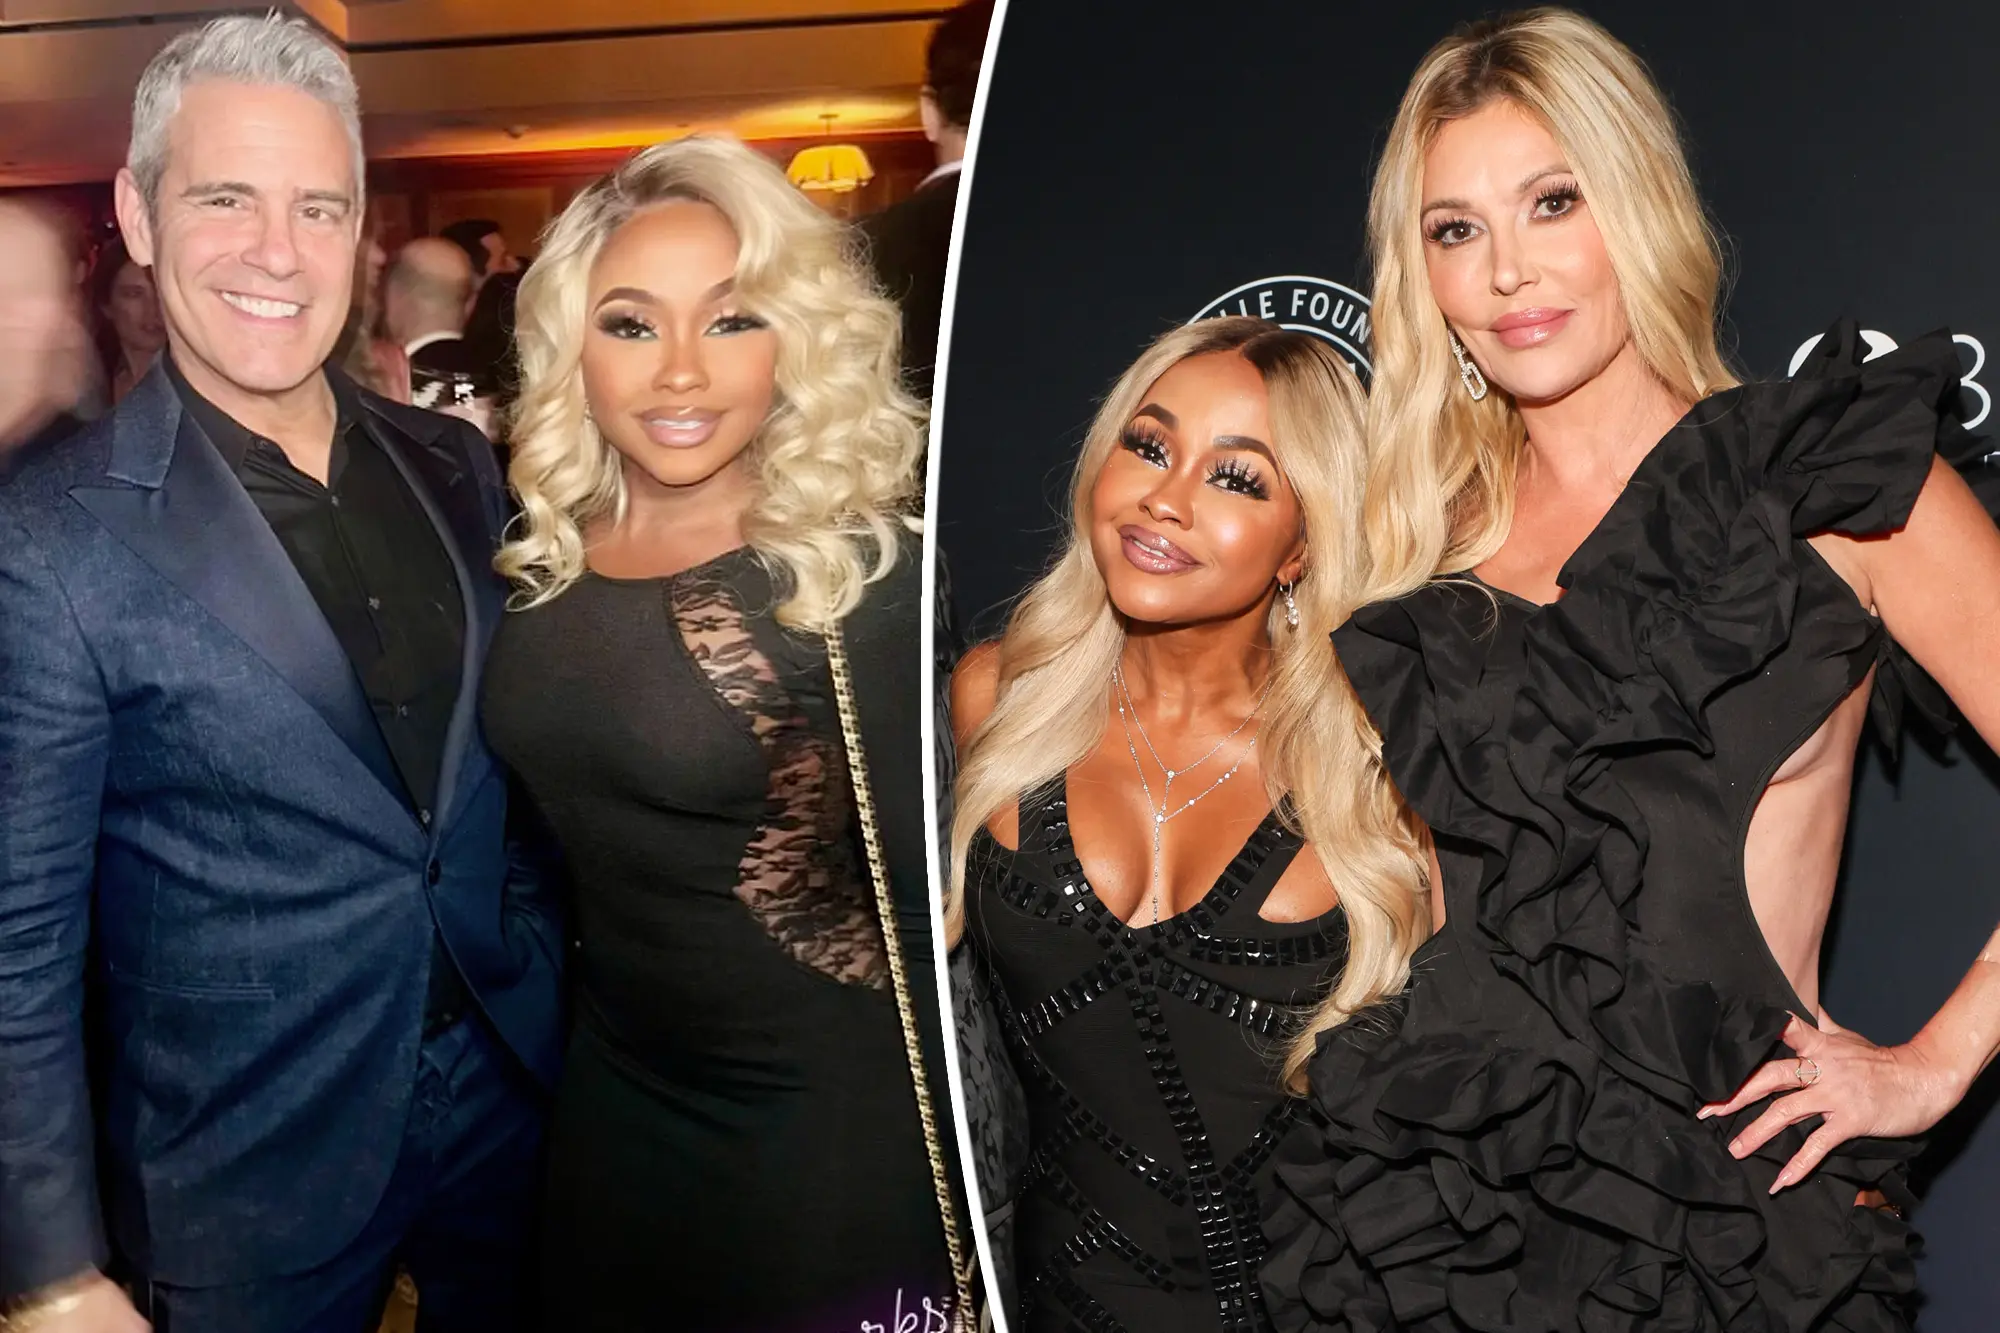 Phaedra Parks: How I Maintain Friendships with Both Andy Cohen and Brandi Glanville After ‘RHUGT’ Drama